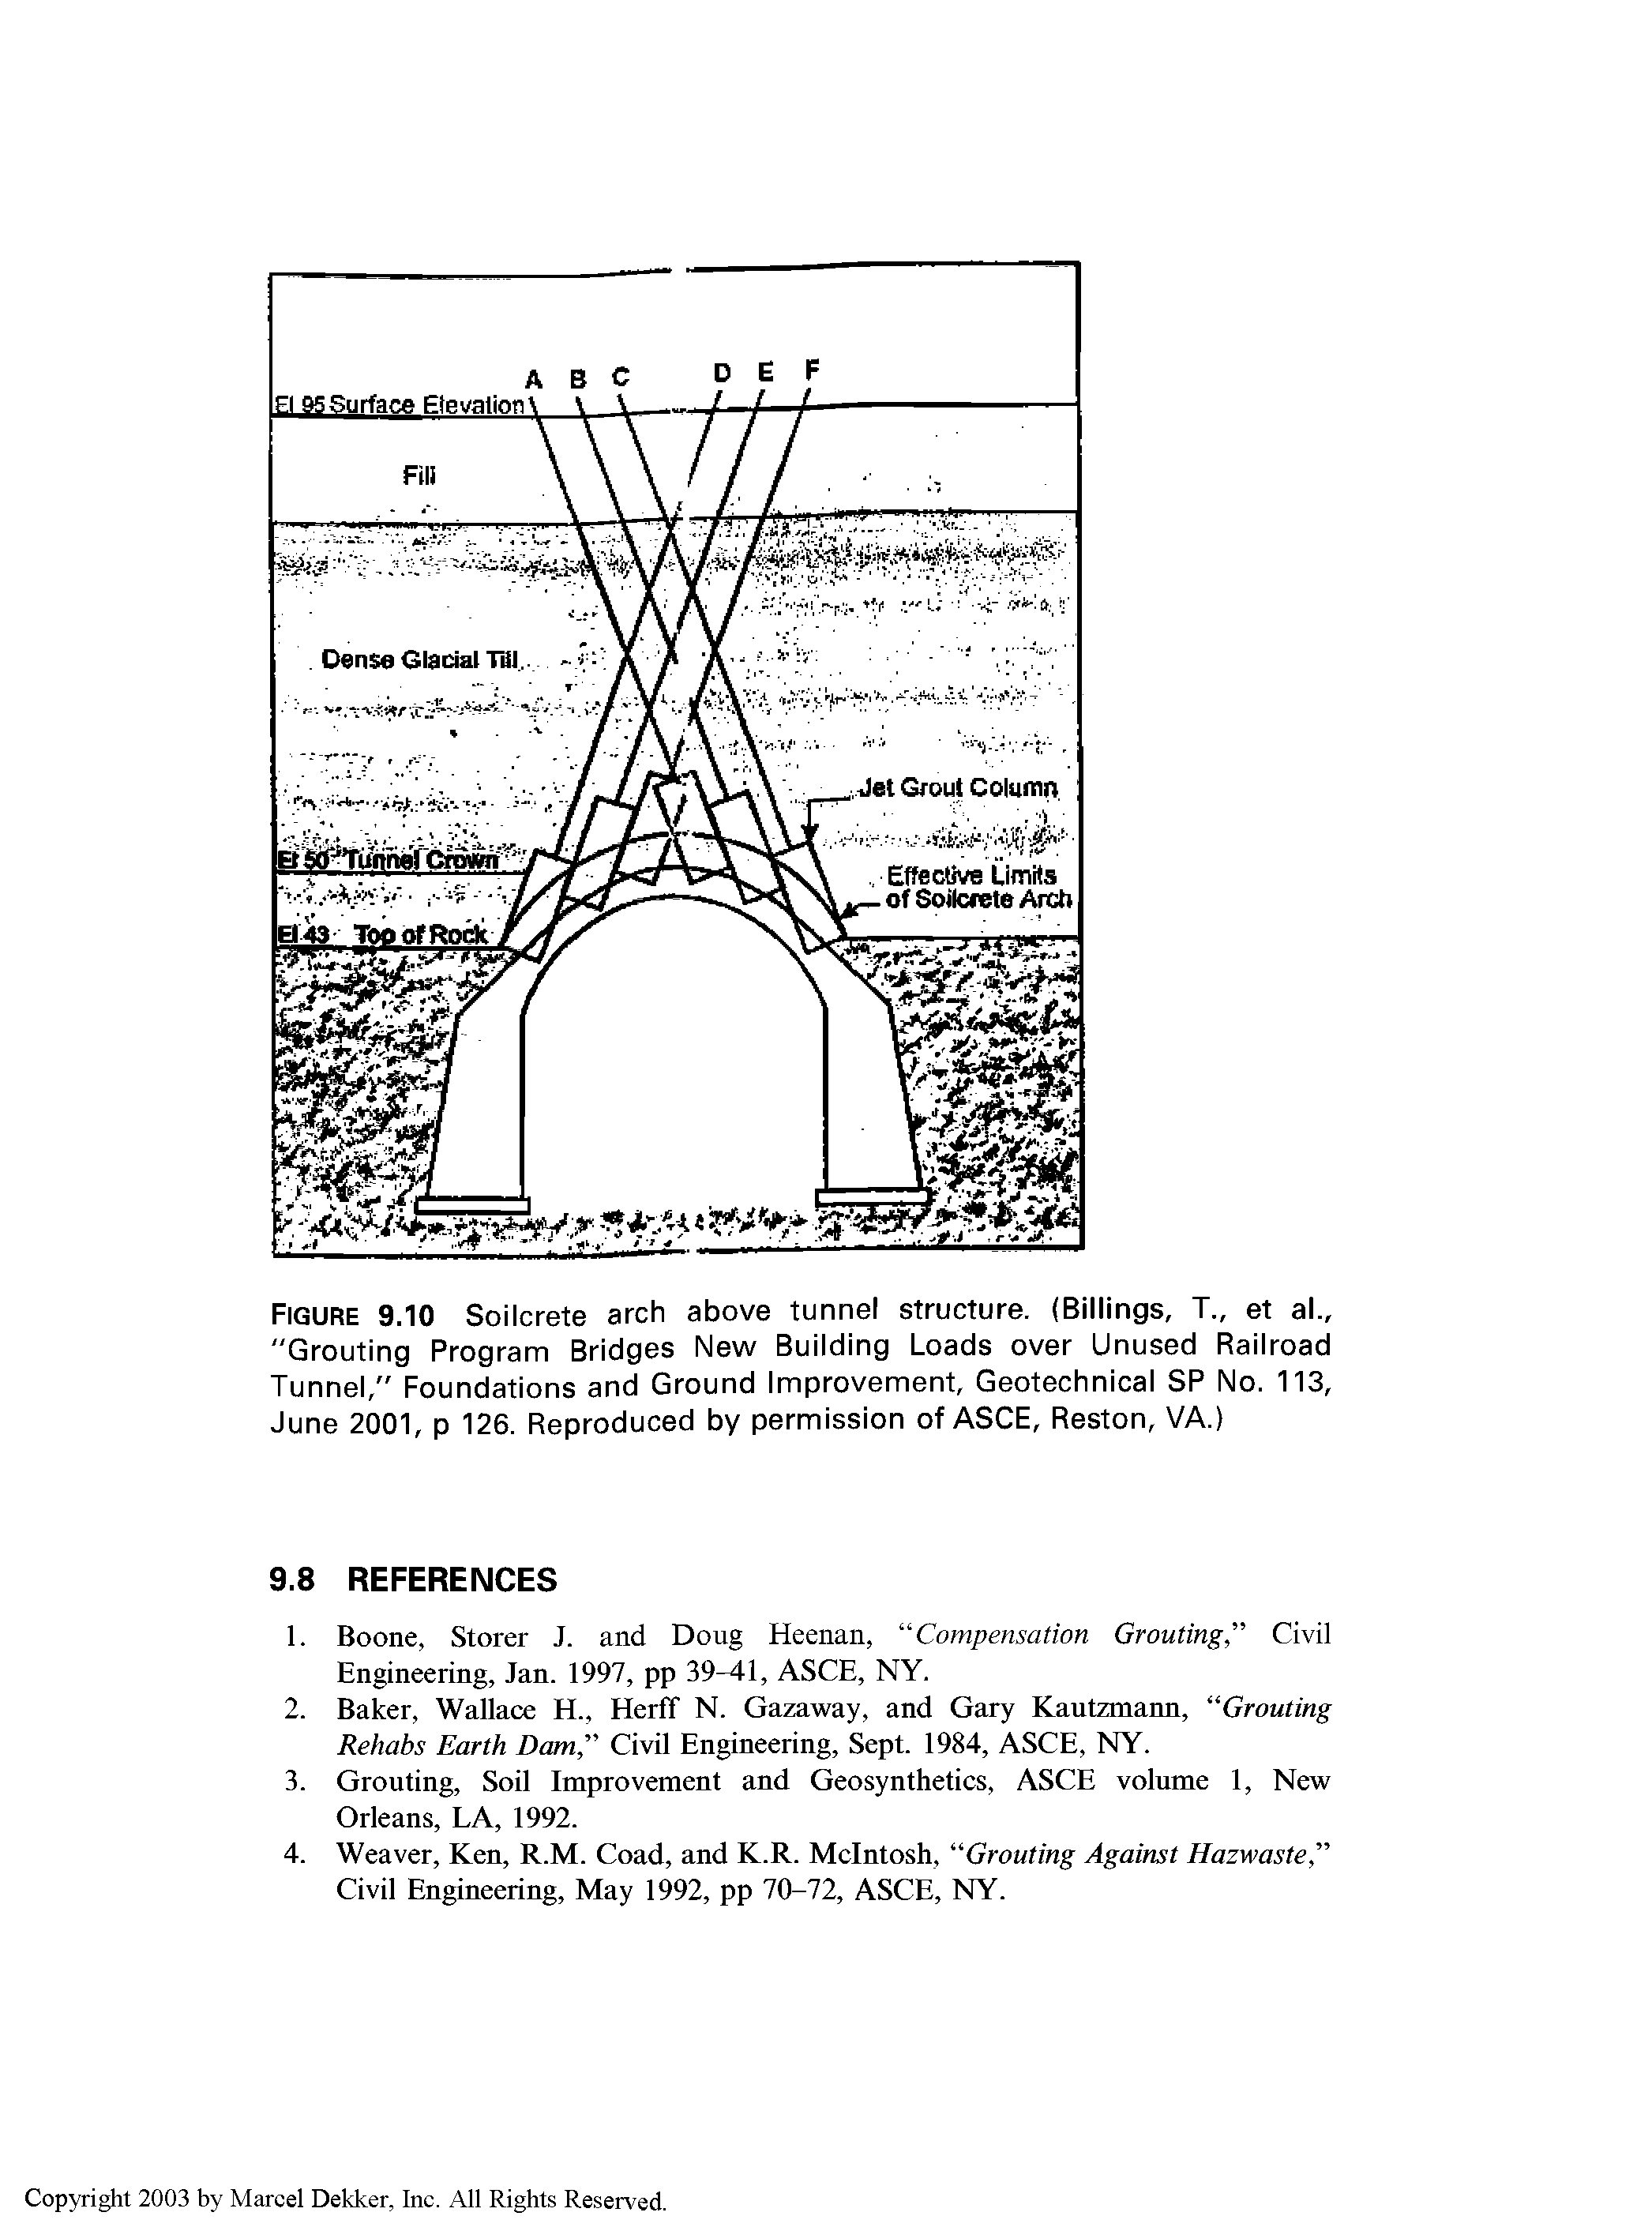 Figure 9.10 Soilcrete arch above tunnel structure. (Billings, T., et al., "Grouting Program Bridges New Building Loads over Unused Railroad Tunnel," Foundations and Ground Improvement, Geotechnical SP No. 113, June 2001, p 126. Reproduced by permission of ASCE, Reston, VA.)...